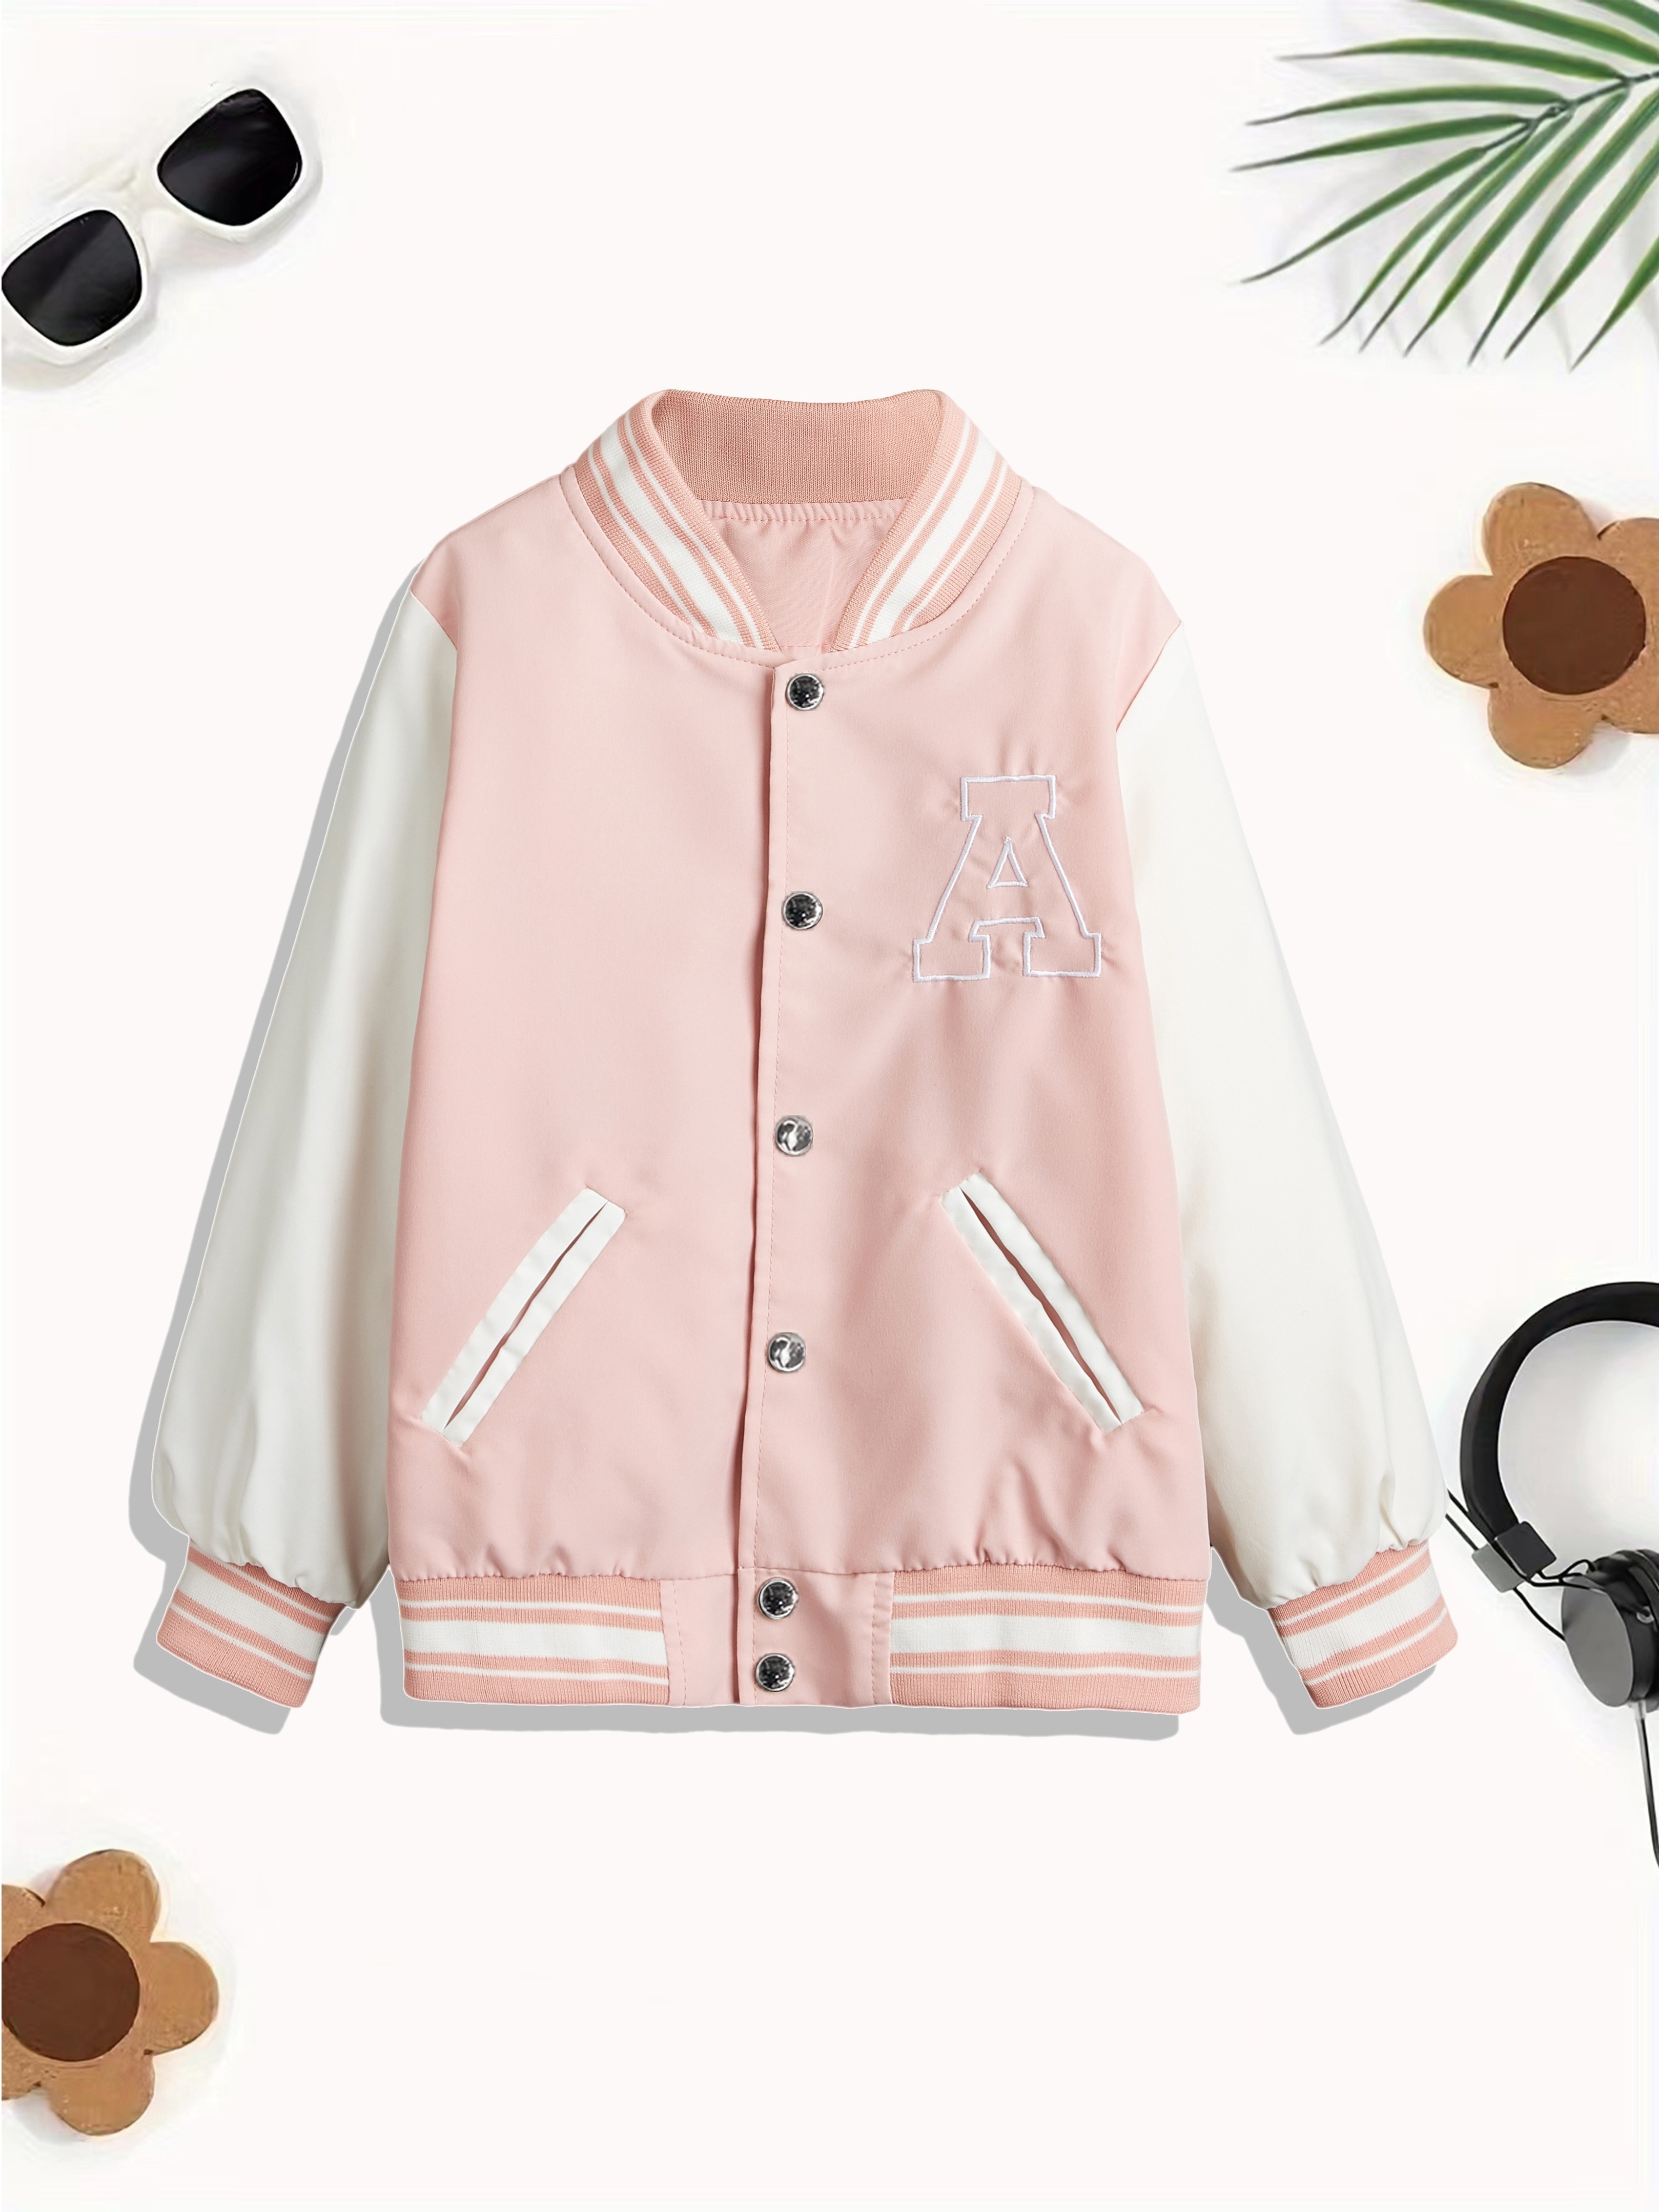 Toddler Girl's Color Block Button Casual Varsity Jacket, Kids Clothing For  Fall/ Spring